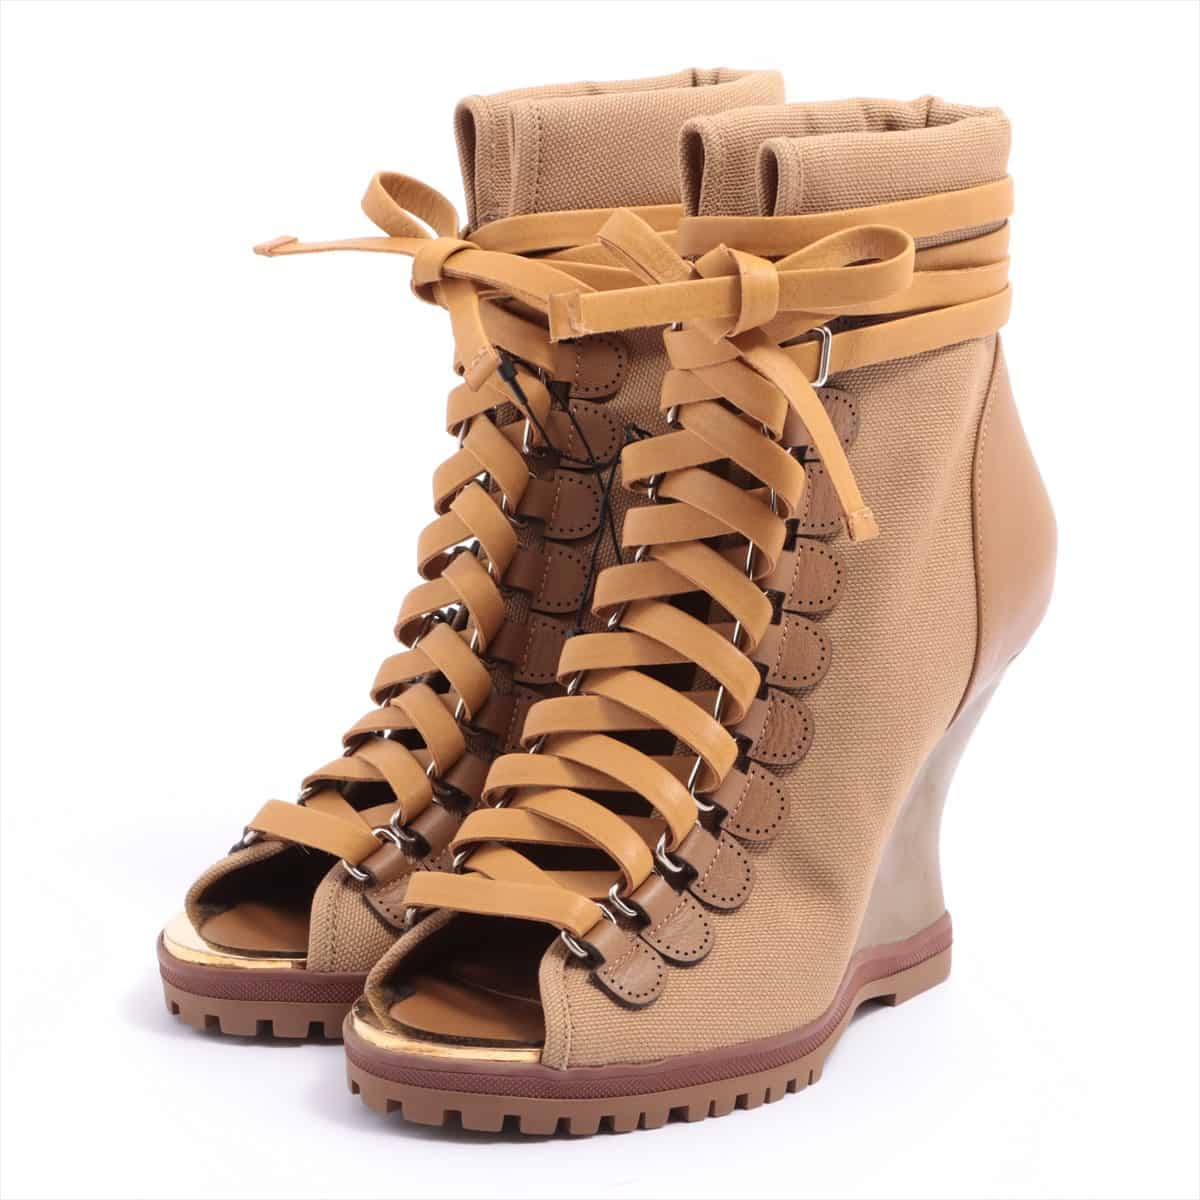 Chloe RIVER Canvas & leather Wedge Sole Sandals 35 Ladies' Camel Lace up